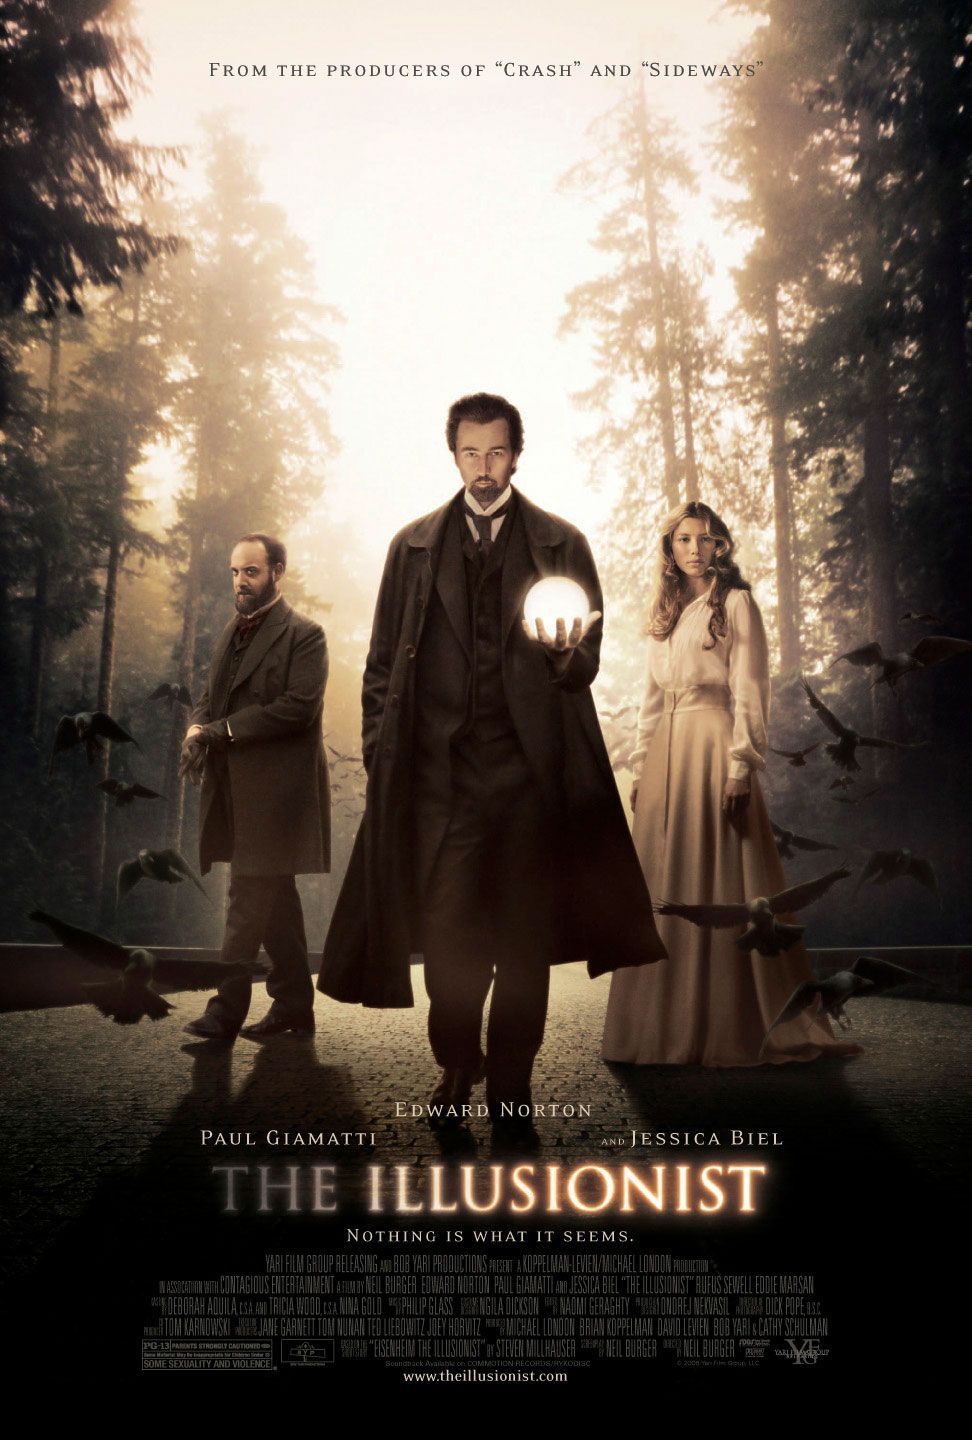 The Illusionist Upcoming Movies. Movie Database. JoBlo.com, Release Date Latest Picture, Posters, Videos and News